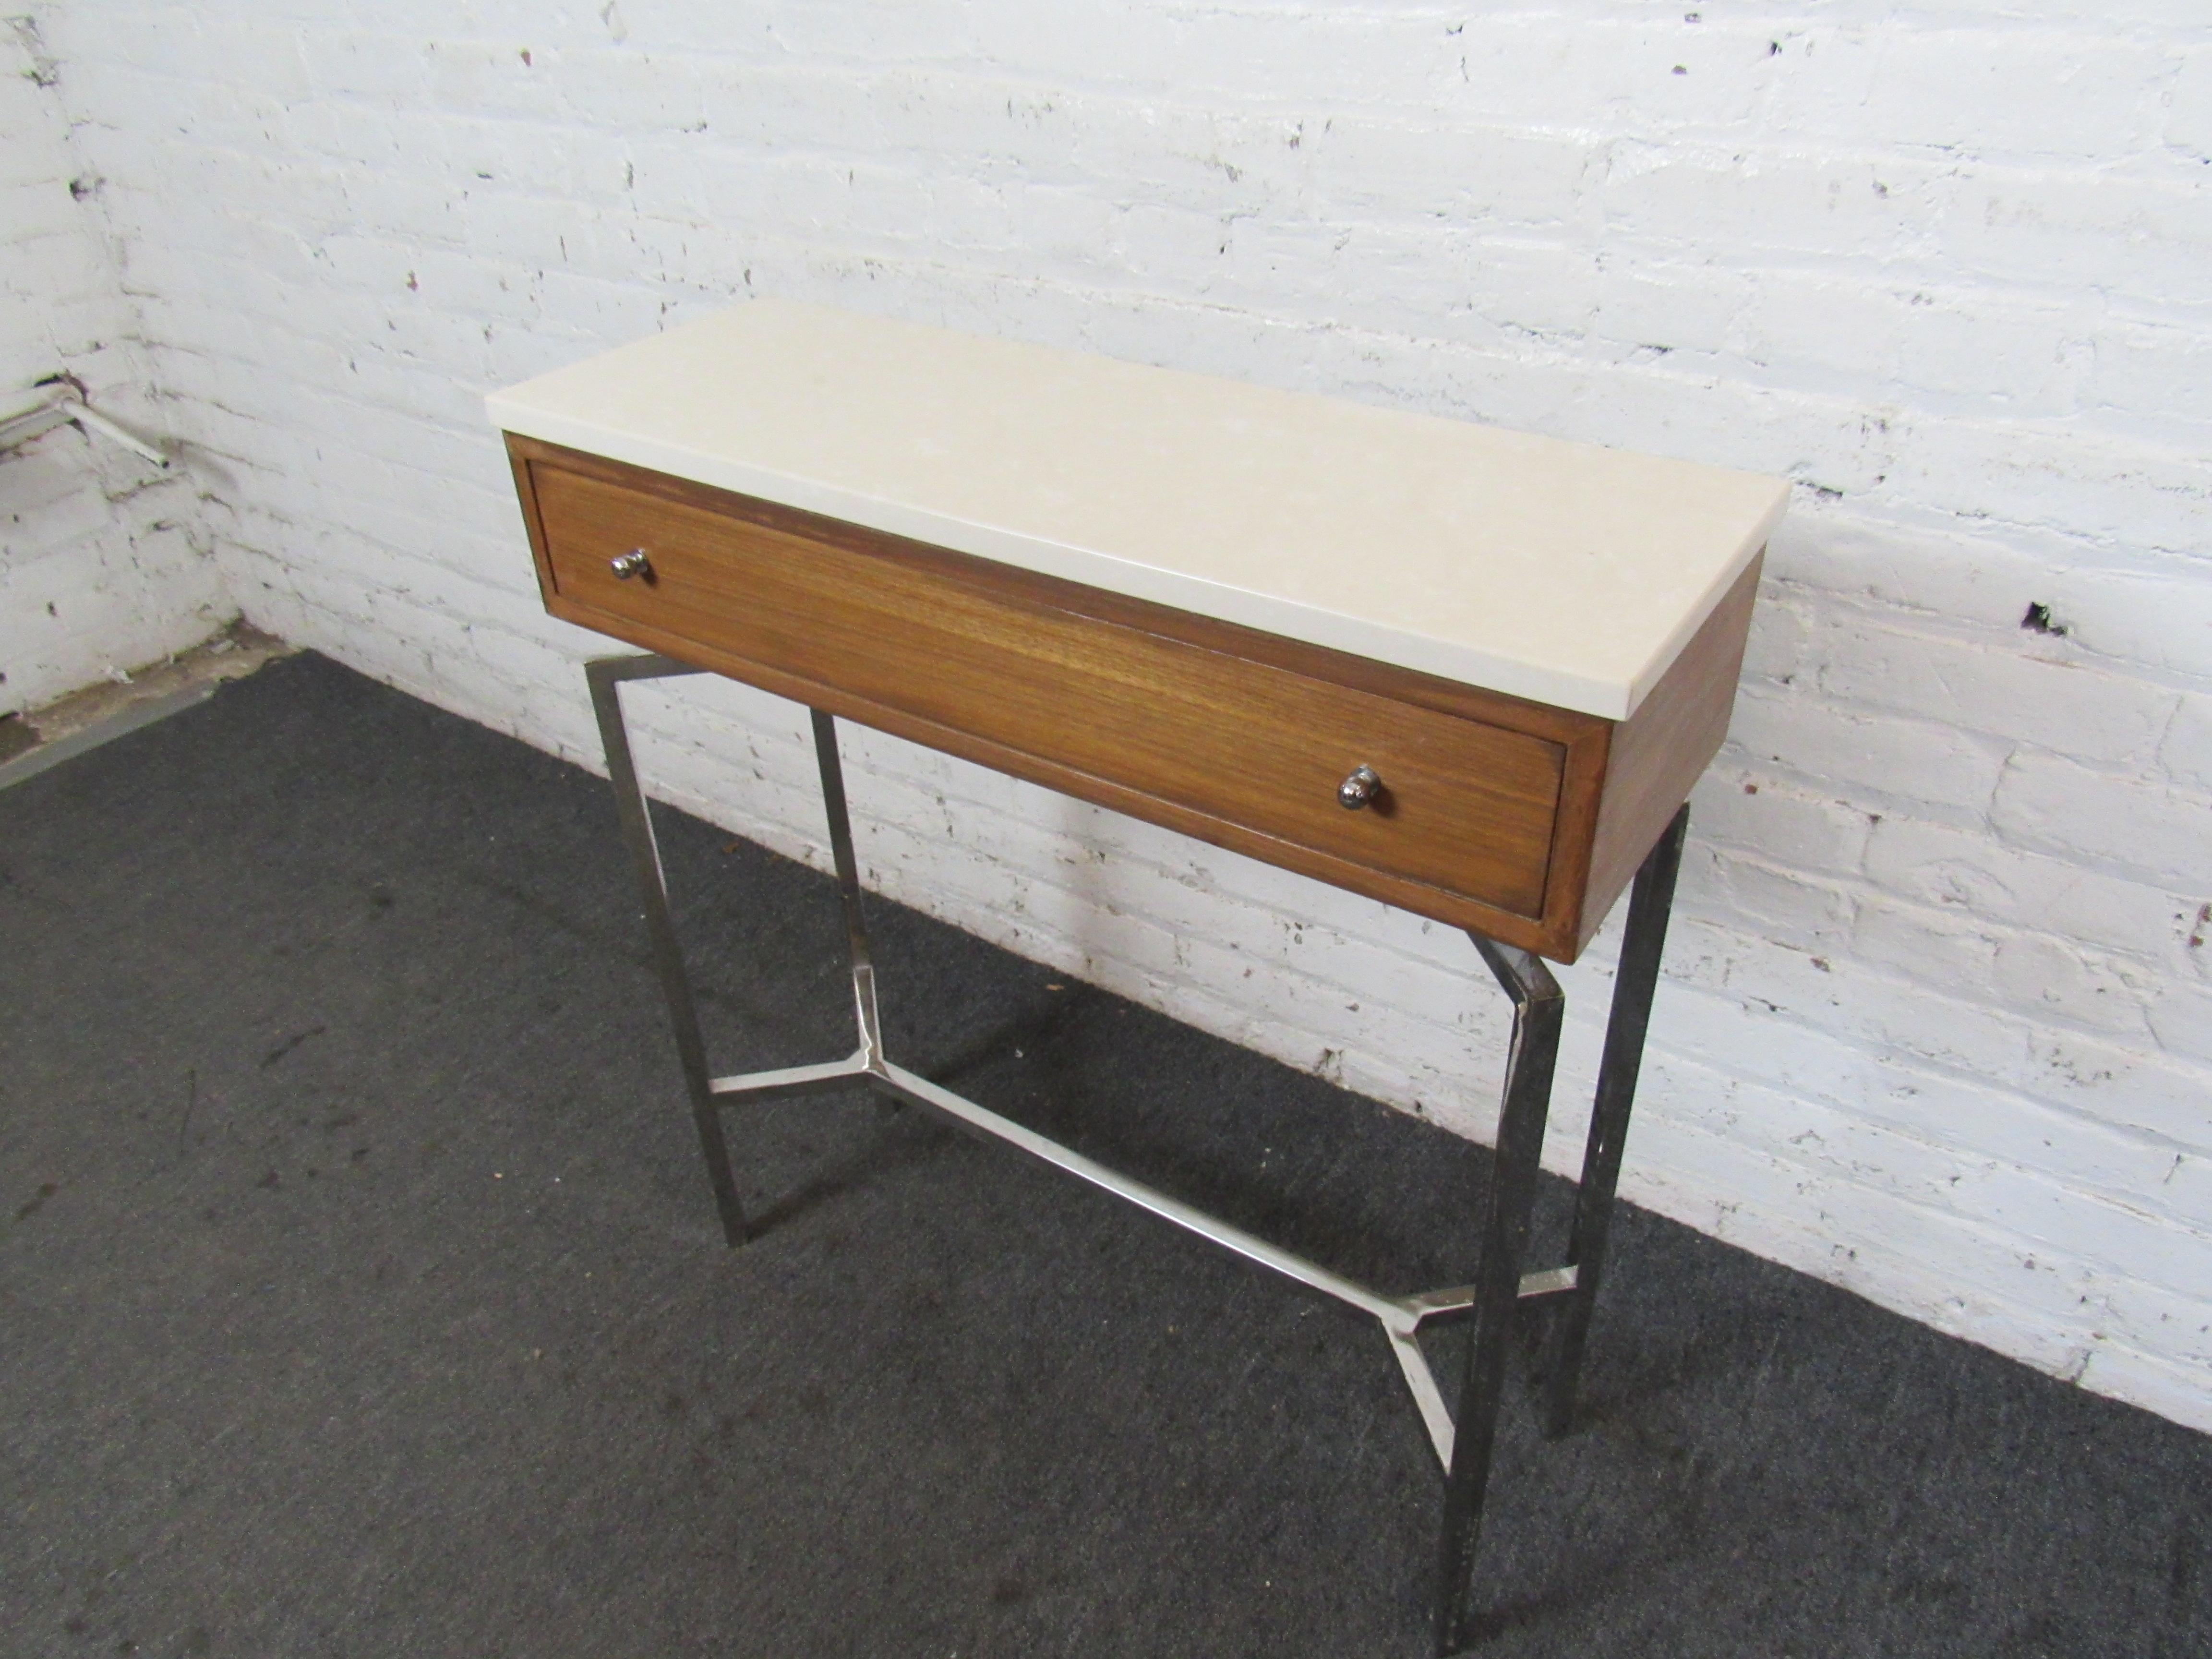 Vintage stone-topped console table by Mitchell Gold + Bob Williams, featuring chrome legs, rich woodgrain, a large drawer for storage, and a unique Mid-Century Modern design. Please confirm item location with seller (NY/NJ).